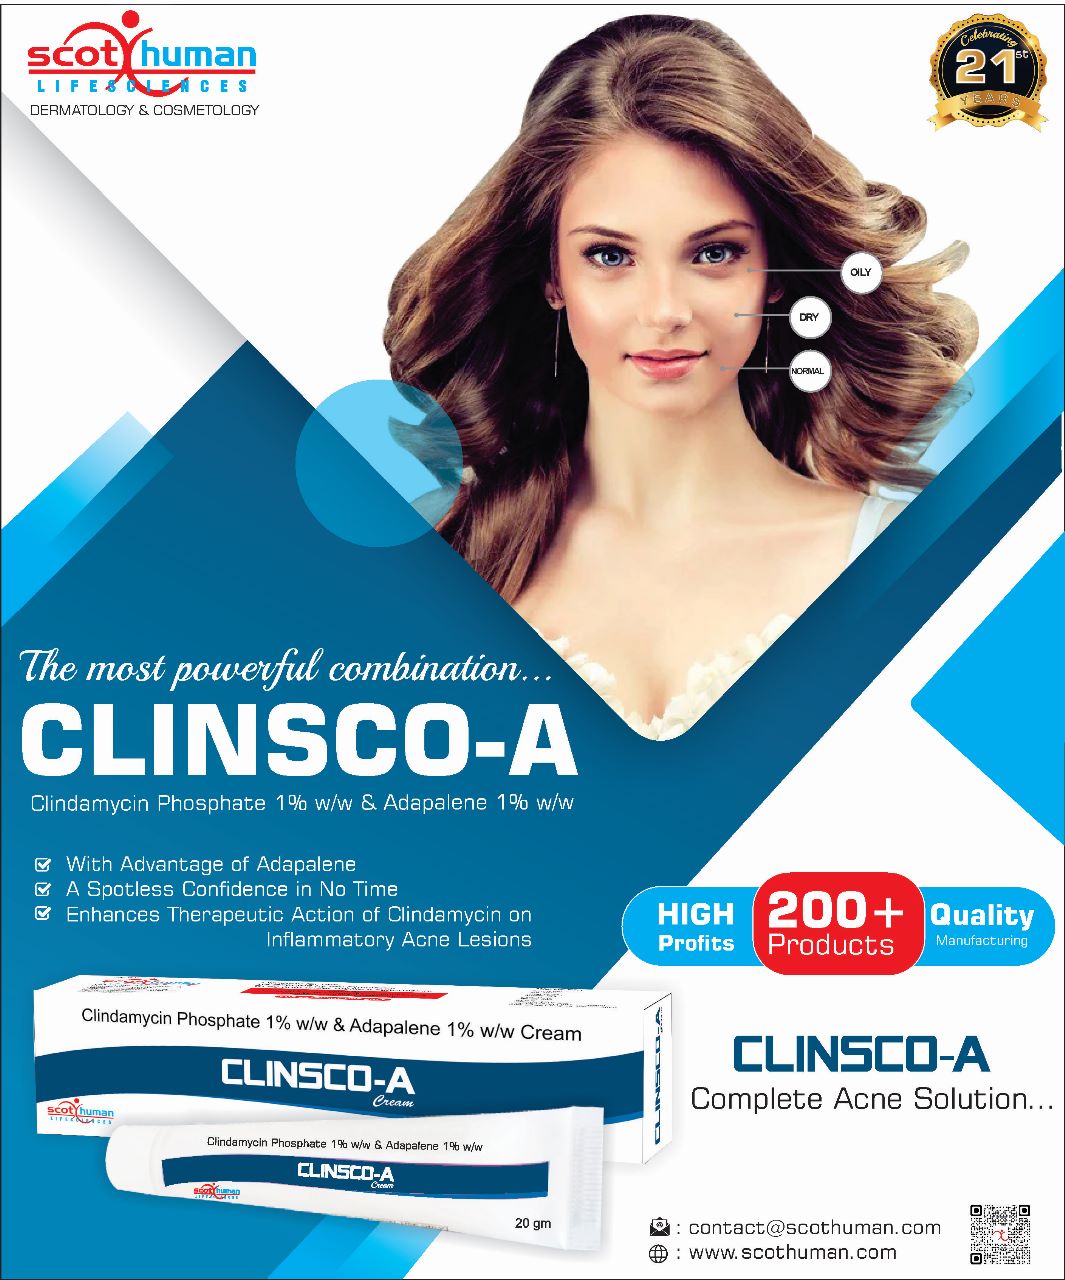 Product Name: Clinsco A, Compositions of are Clindamycin Phsophate & Adapaiene - Pharma Drugs and Chemicals